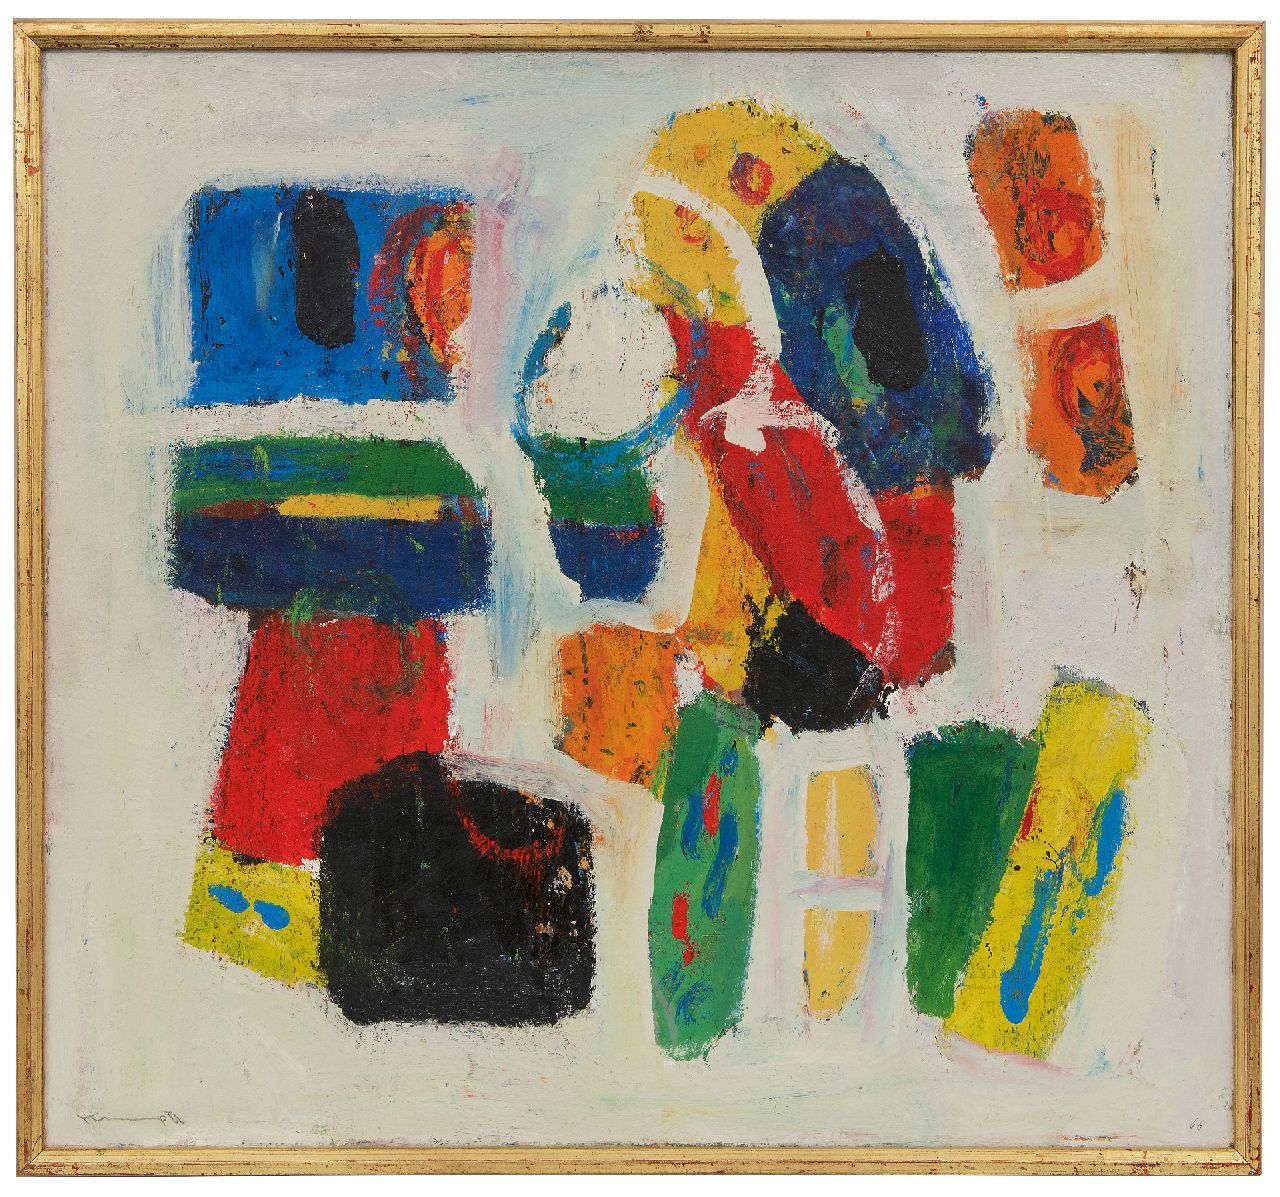 Kropff J.  | Johan 'Joop' Kropff | Paintings offered for sale | Composition, oil on canvas 50.4 x 54.7 cm, signed l.l. and on the reverse and dated '66